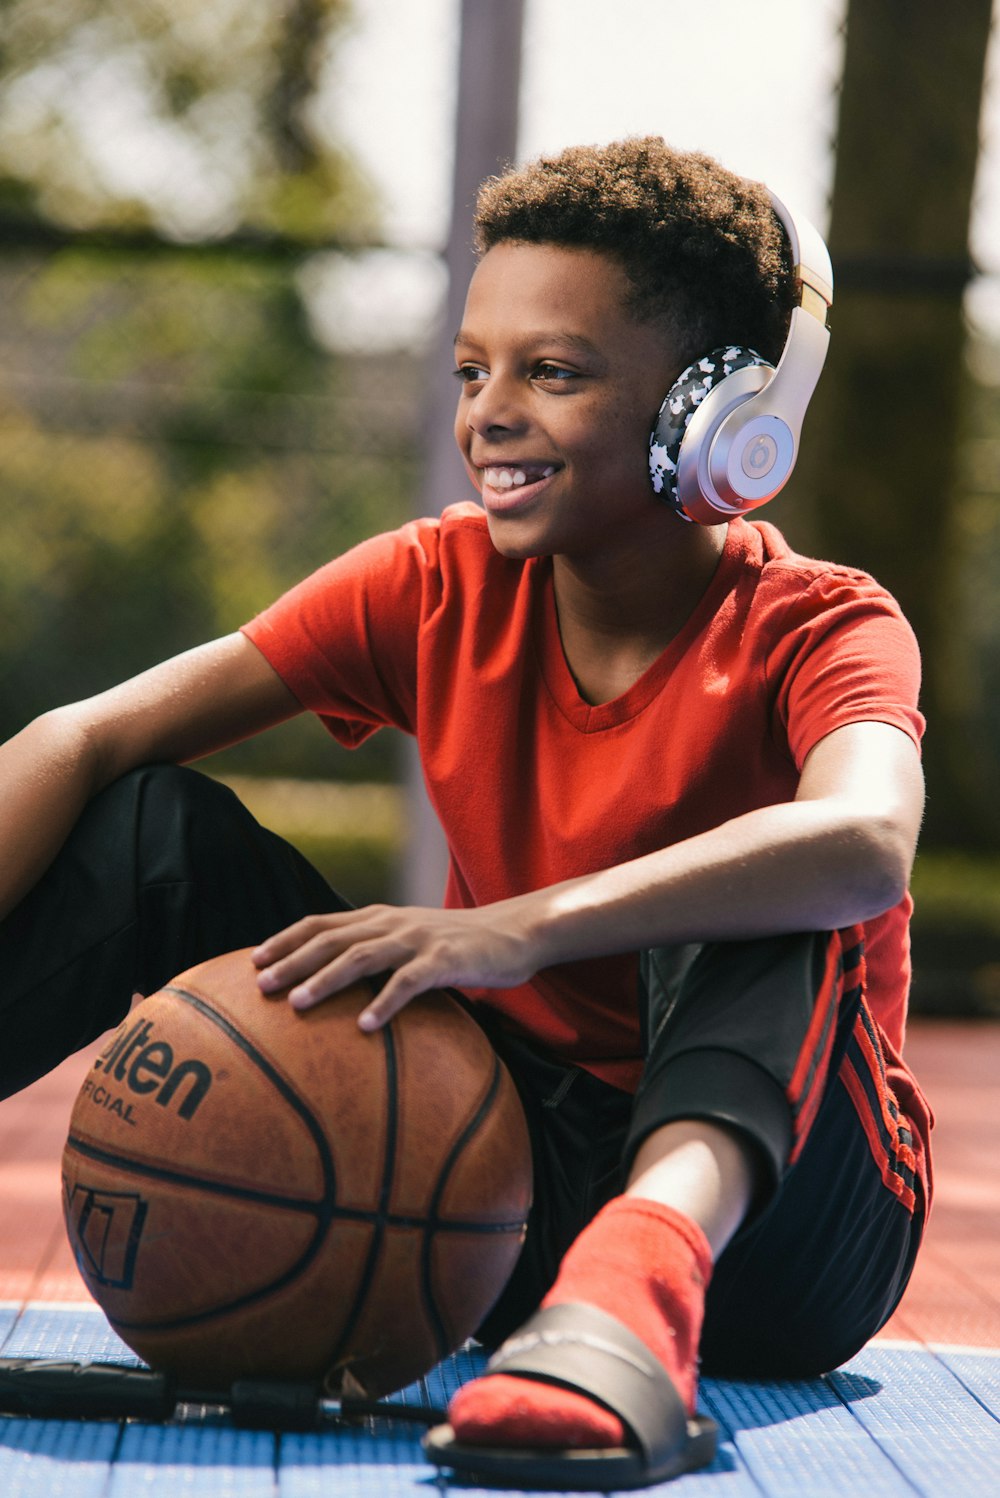 selective focus photography of smiling boy wearing headphones and holding basketball